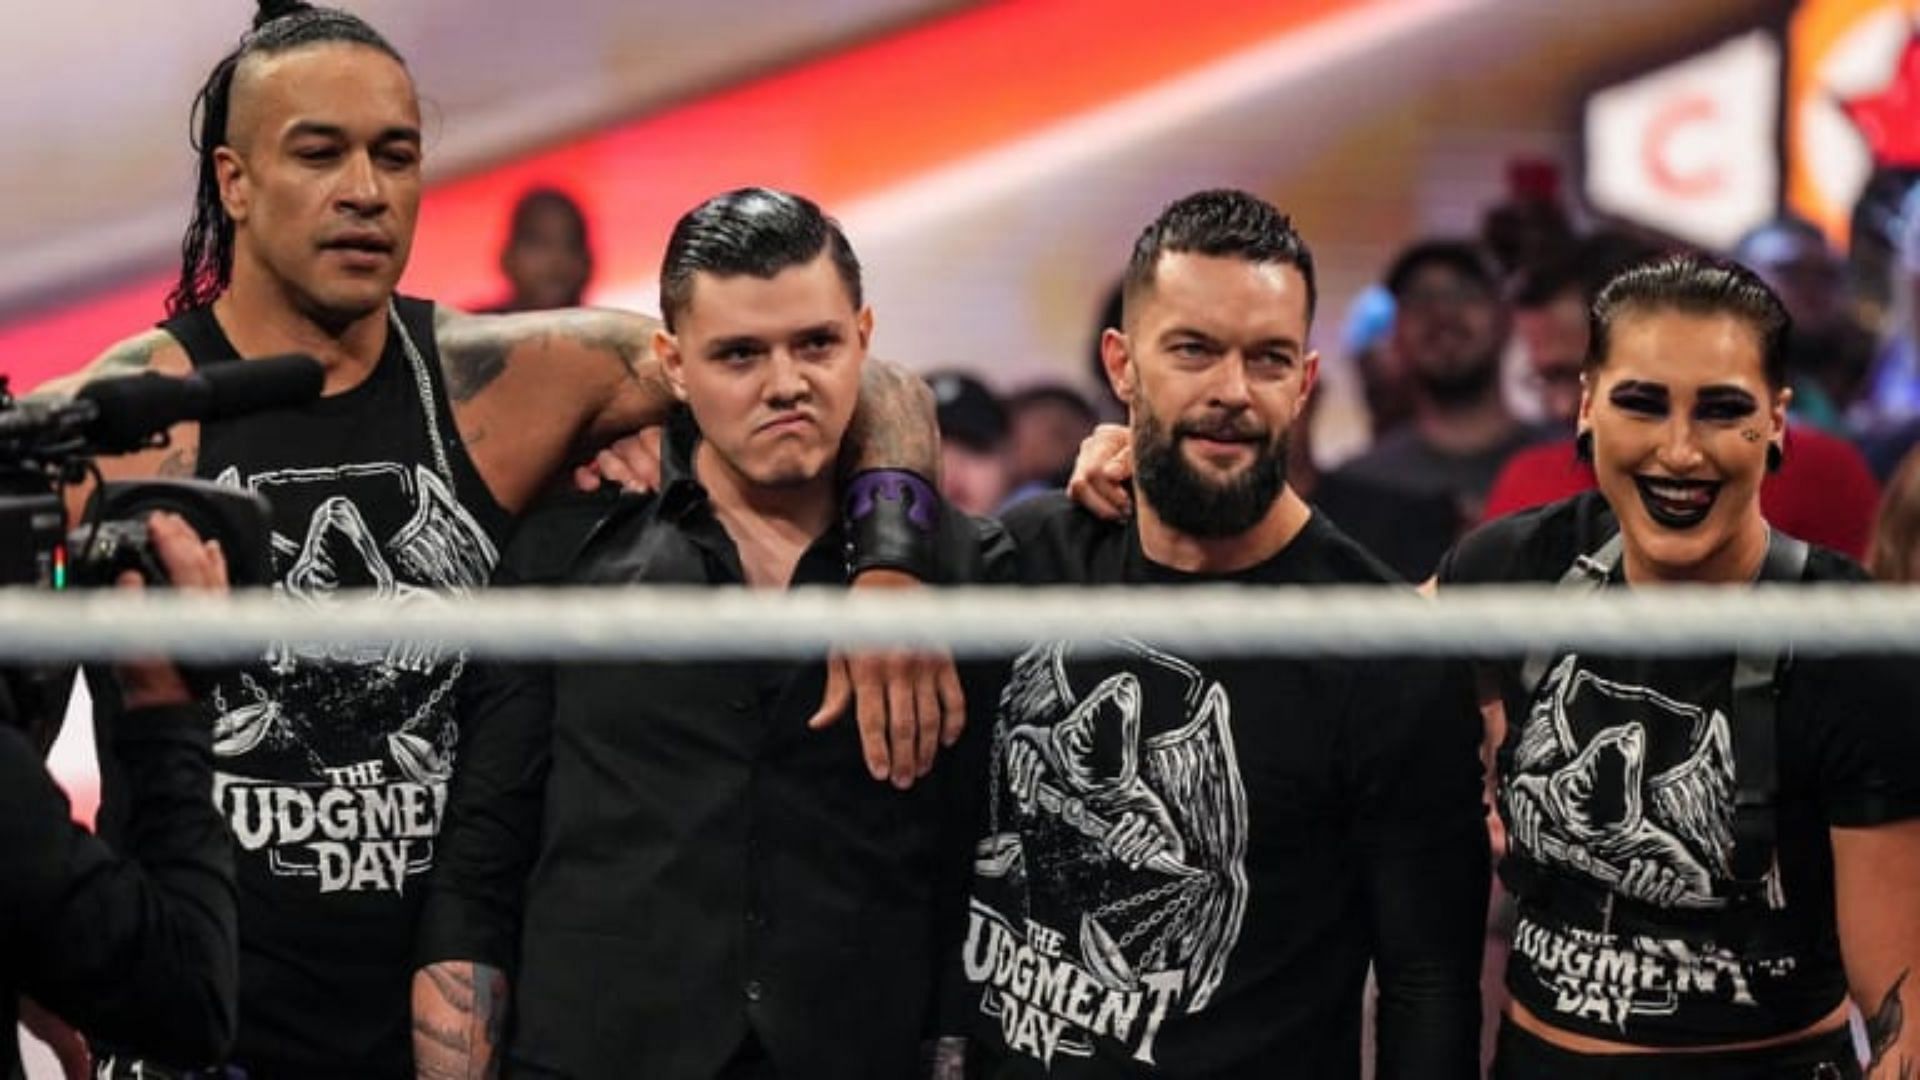 The Judgment Day (from left to right): Damien Priest, Dominik Mysterio, Finn B&aacute;lor and Rhea Ripley